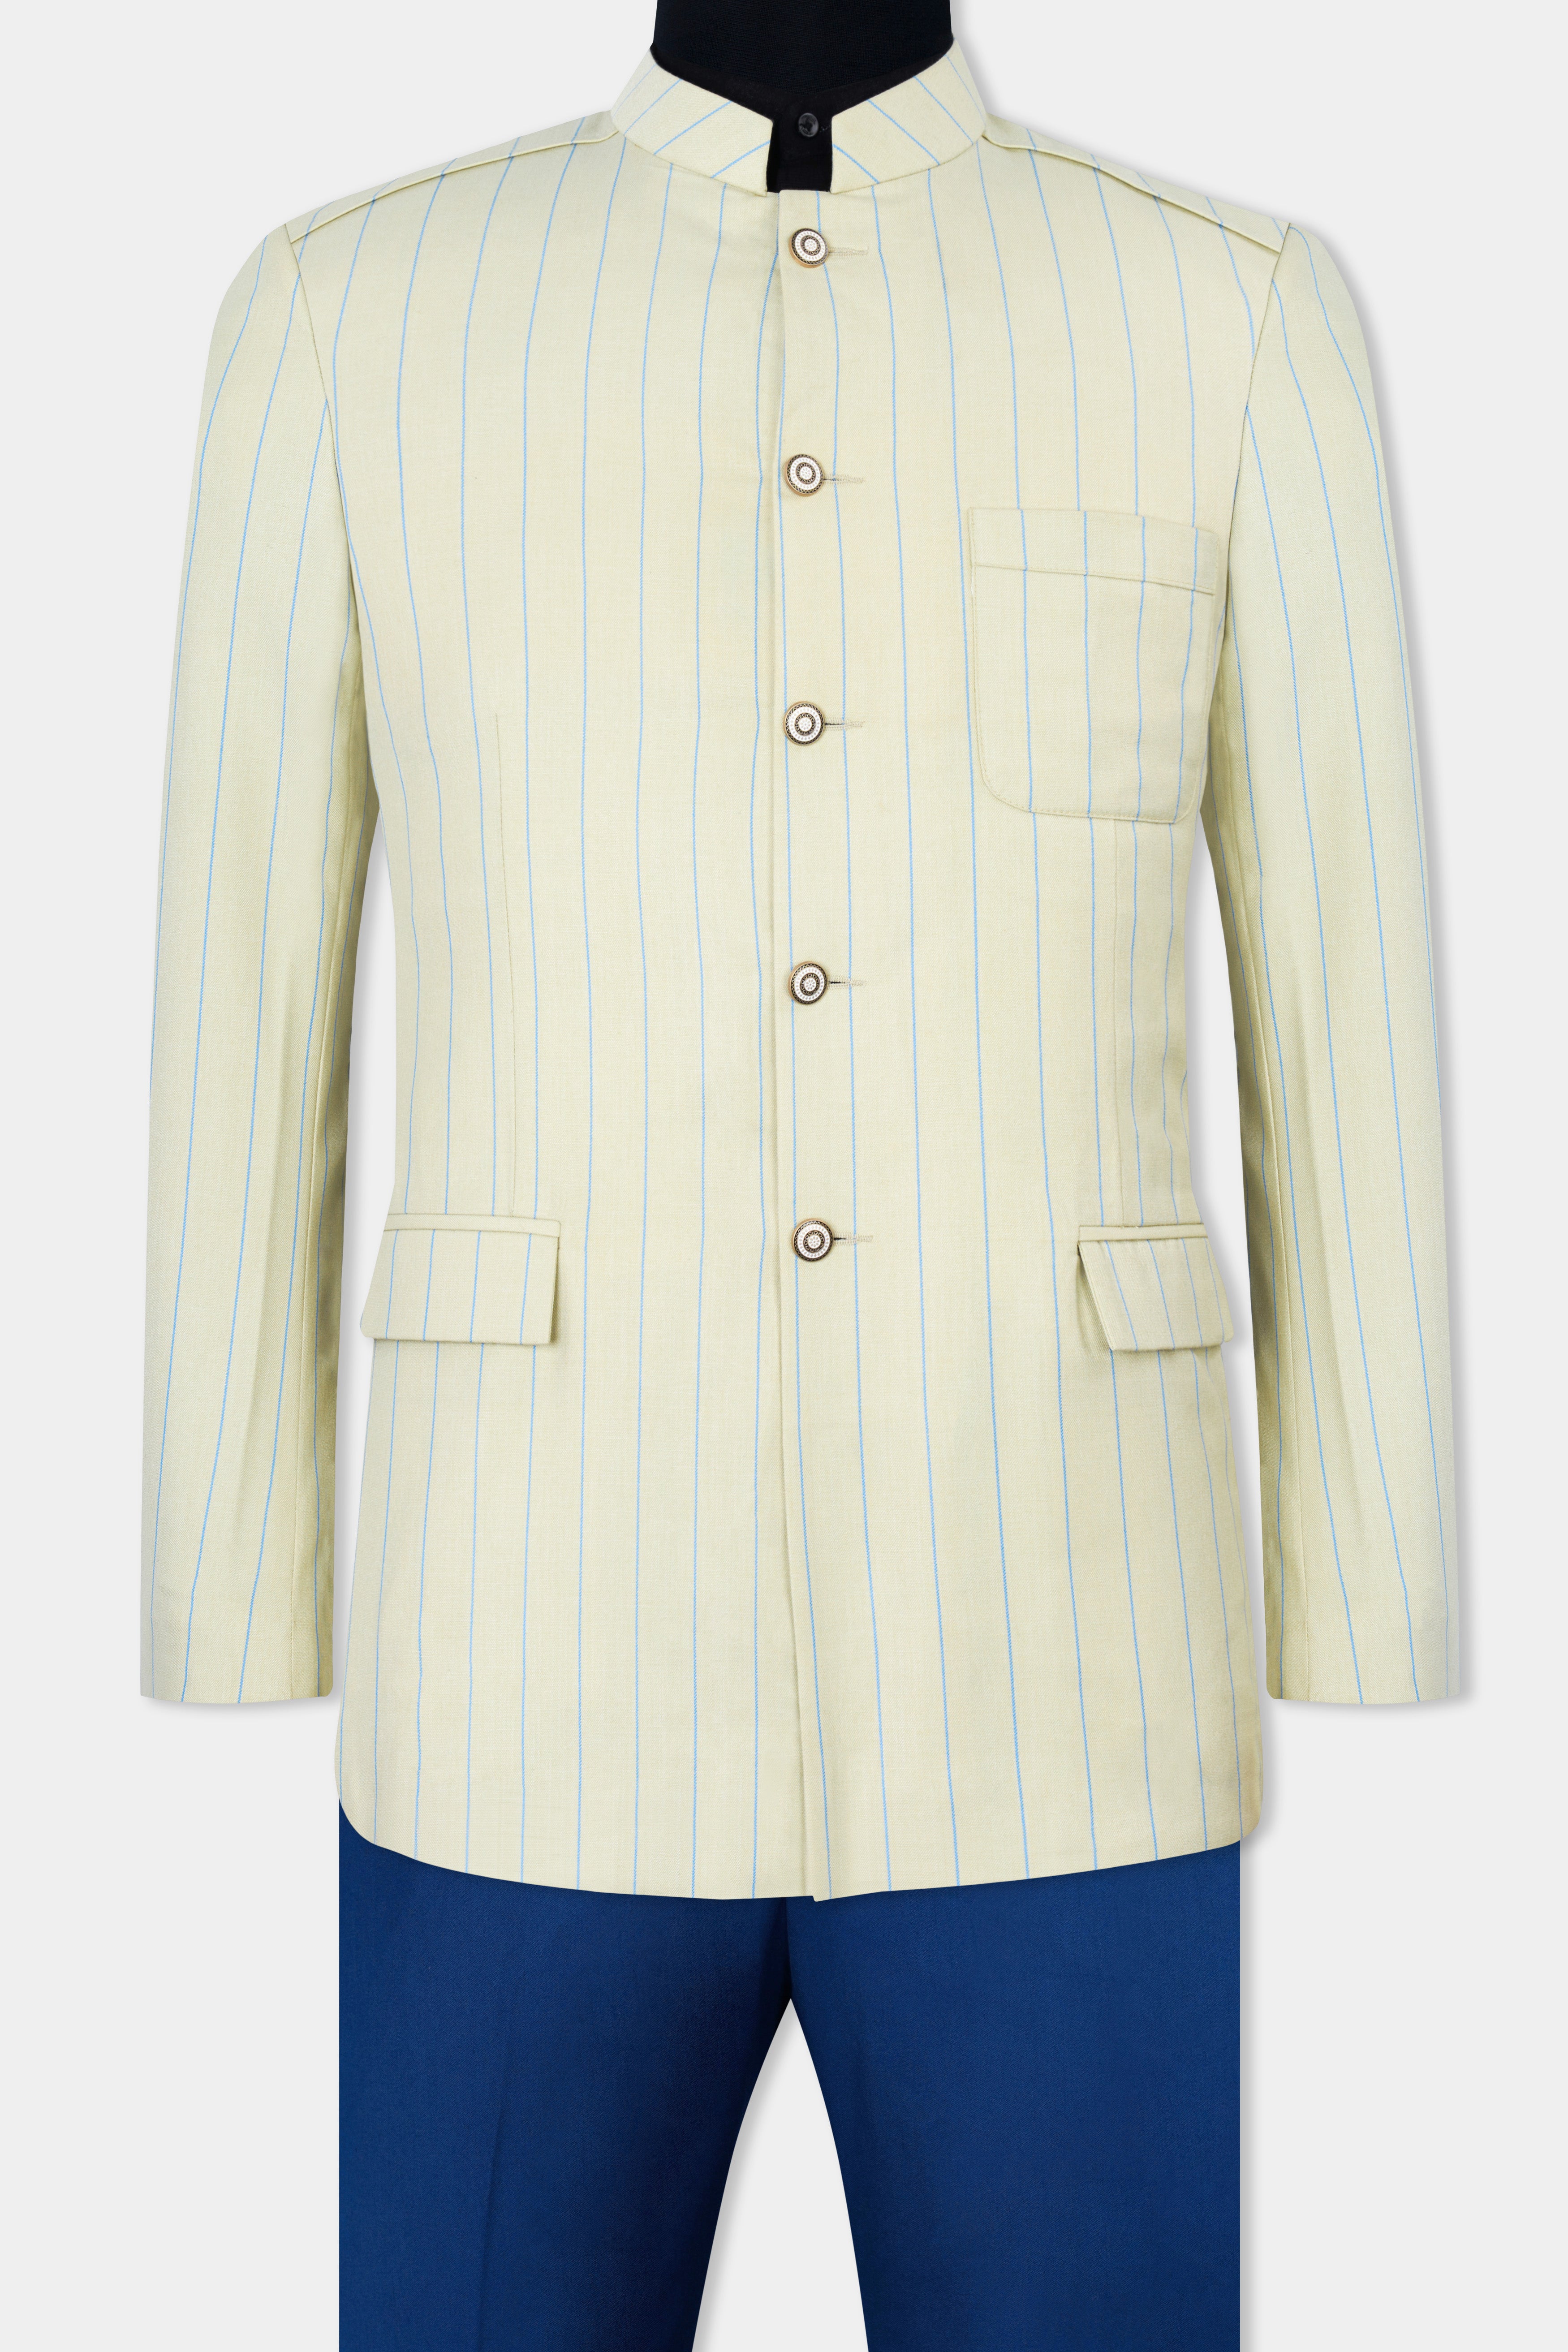 Ivory Cream with Celestial Blue Striped Wool Rich Bandhgala Suit ST2877-BG-D430-36,ST2877-BG-D430-38,ST2877-BG-D430-40,ST2877-BG-D430-42,ST2877-BG-D430-44,ST2877-BG-D430-46,ST2877-BG-D430-48,ST2877-BG-D430-50,ST2877-BG-D430-52,ST2877-BG-D430-54,ST2877-BG-D430-56,ST2877-BG-D430-58,ST2877-BG-D430-60